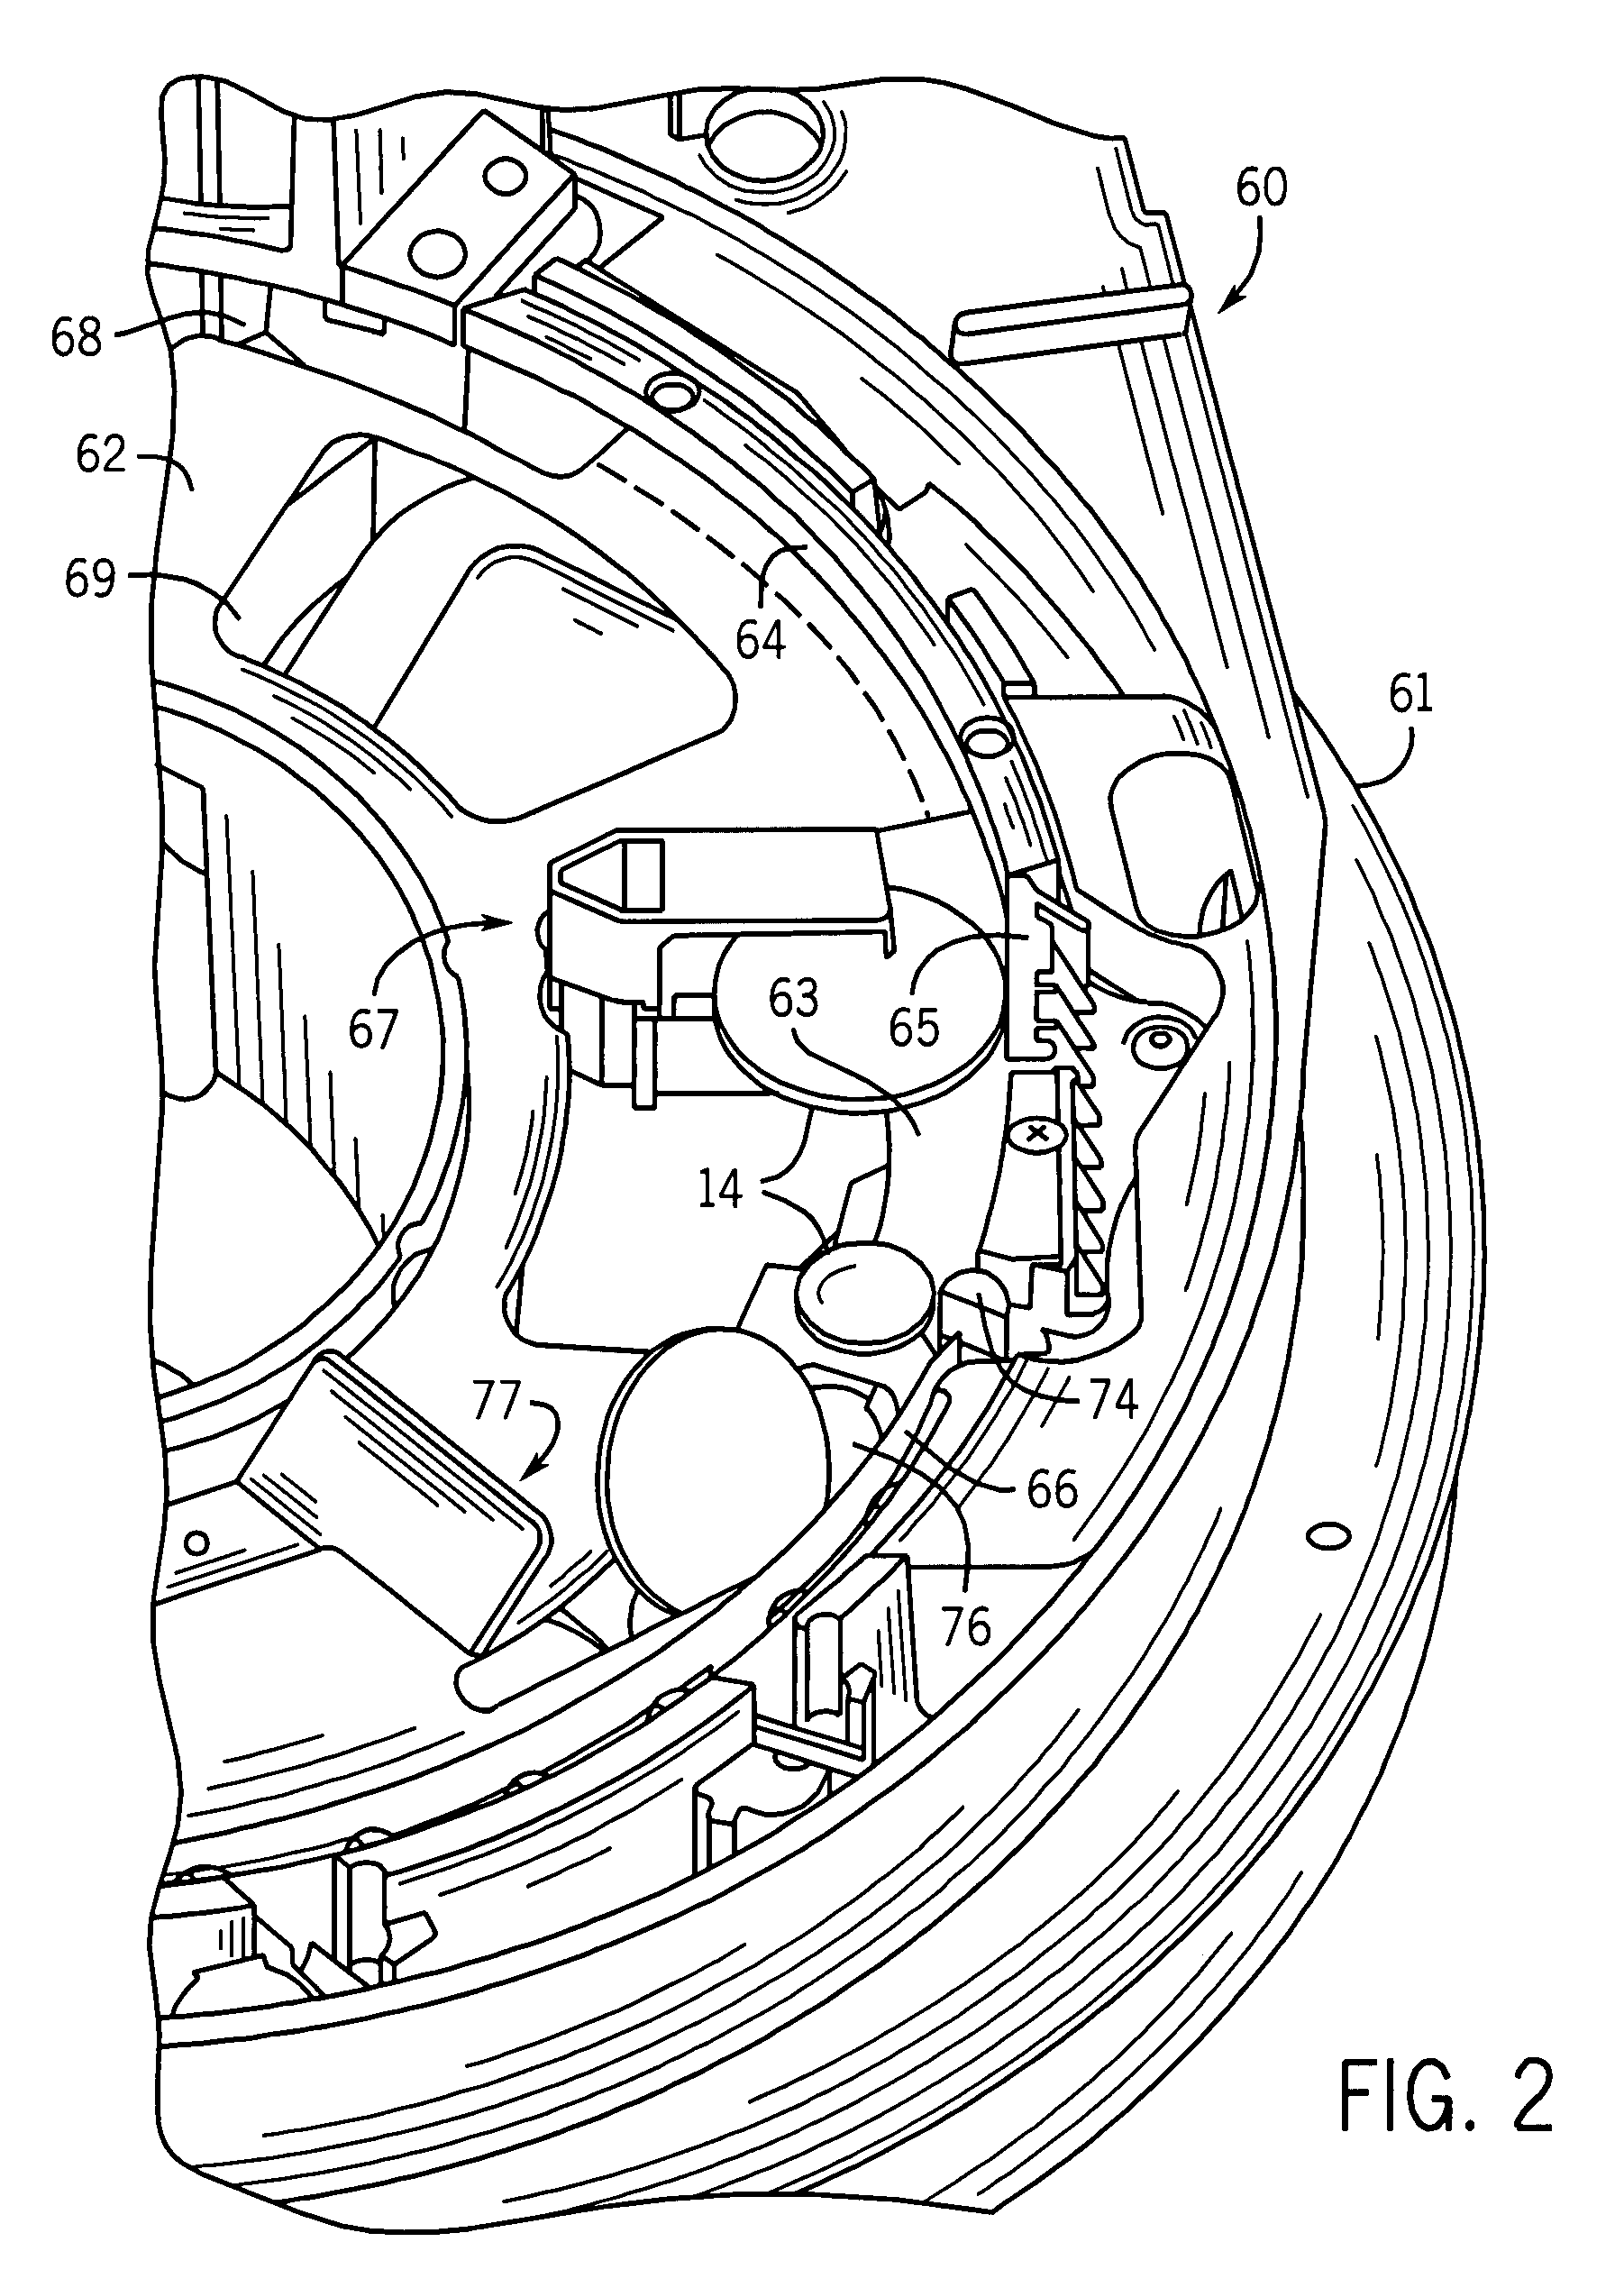 Method and sensor for sensing coins for valuation